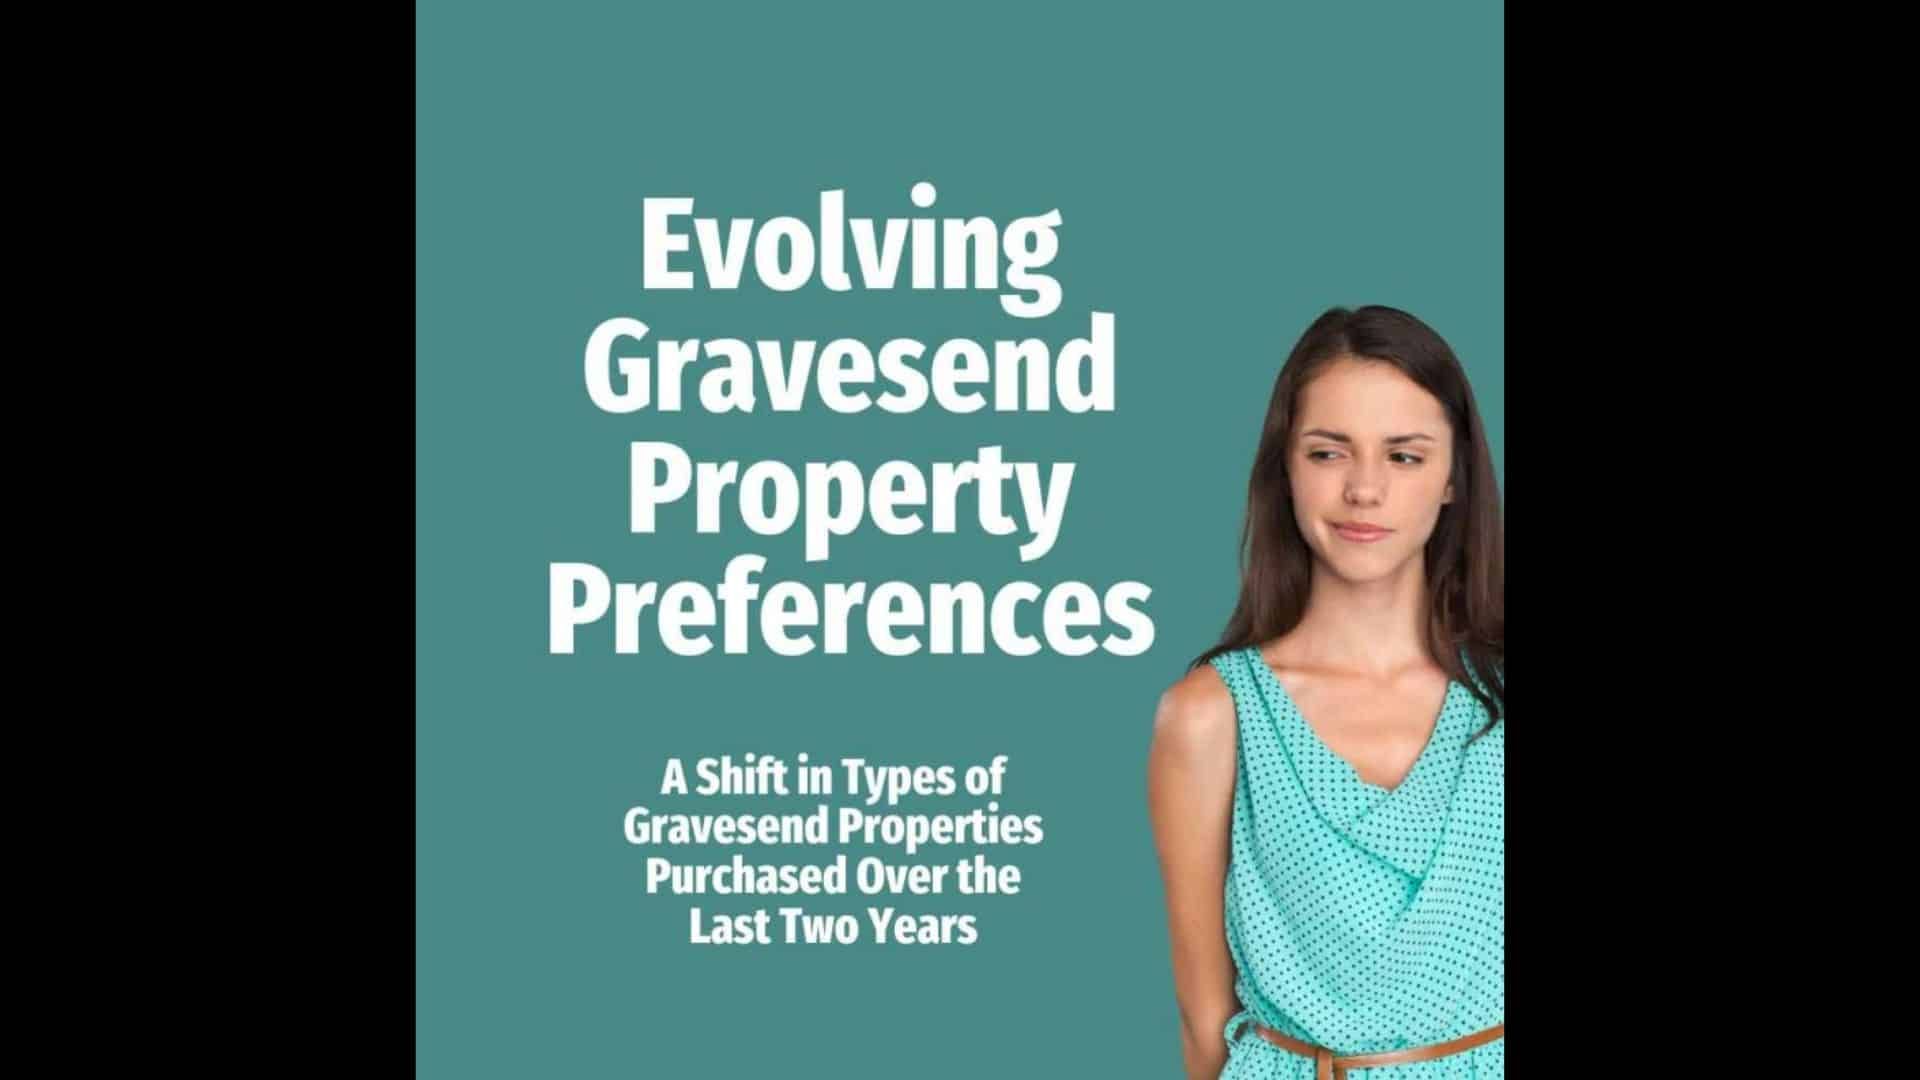 Evolving Gravesend Property Preferences: A Shift In Types Of Gravesend Properties Purchased Over The Last Two Years